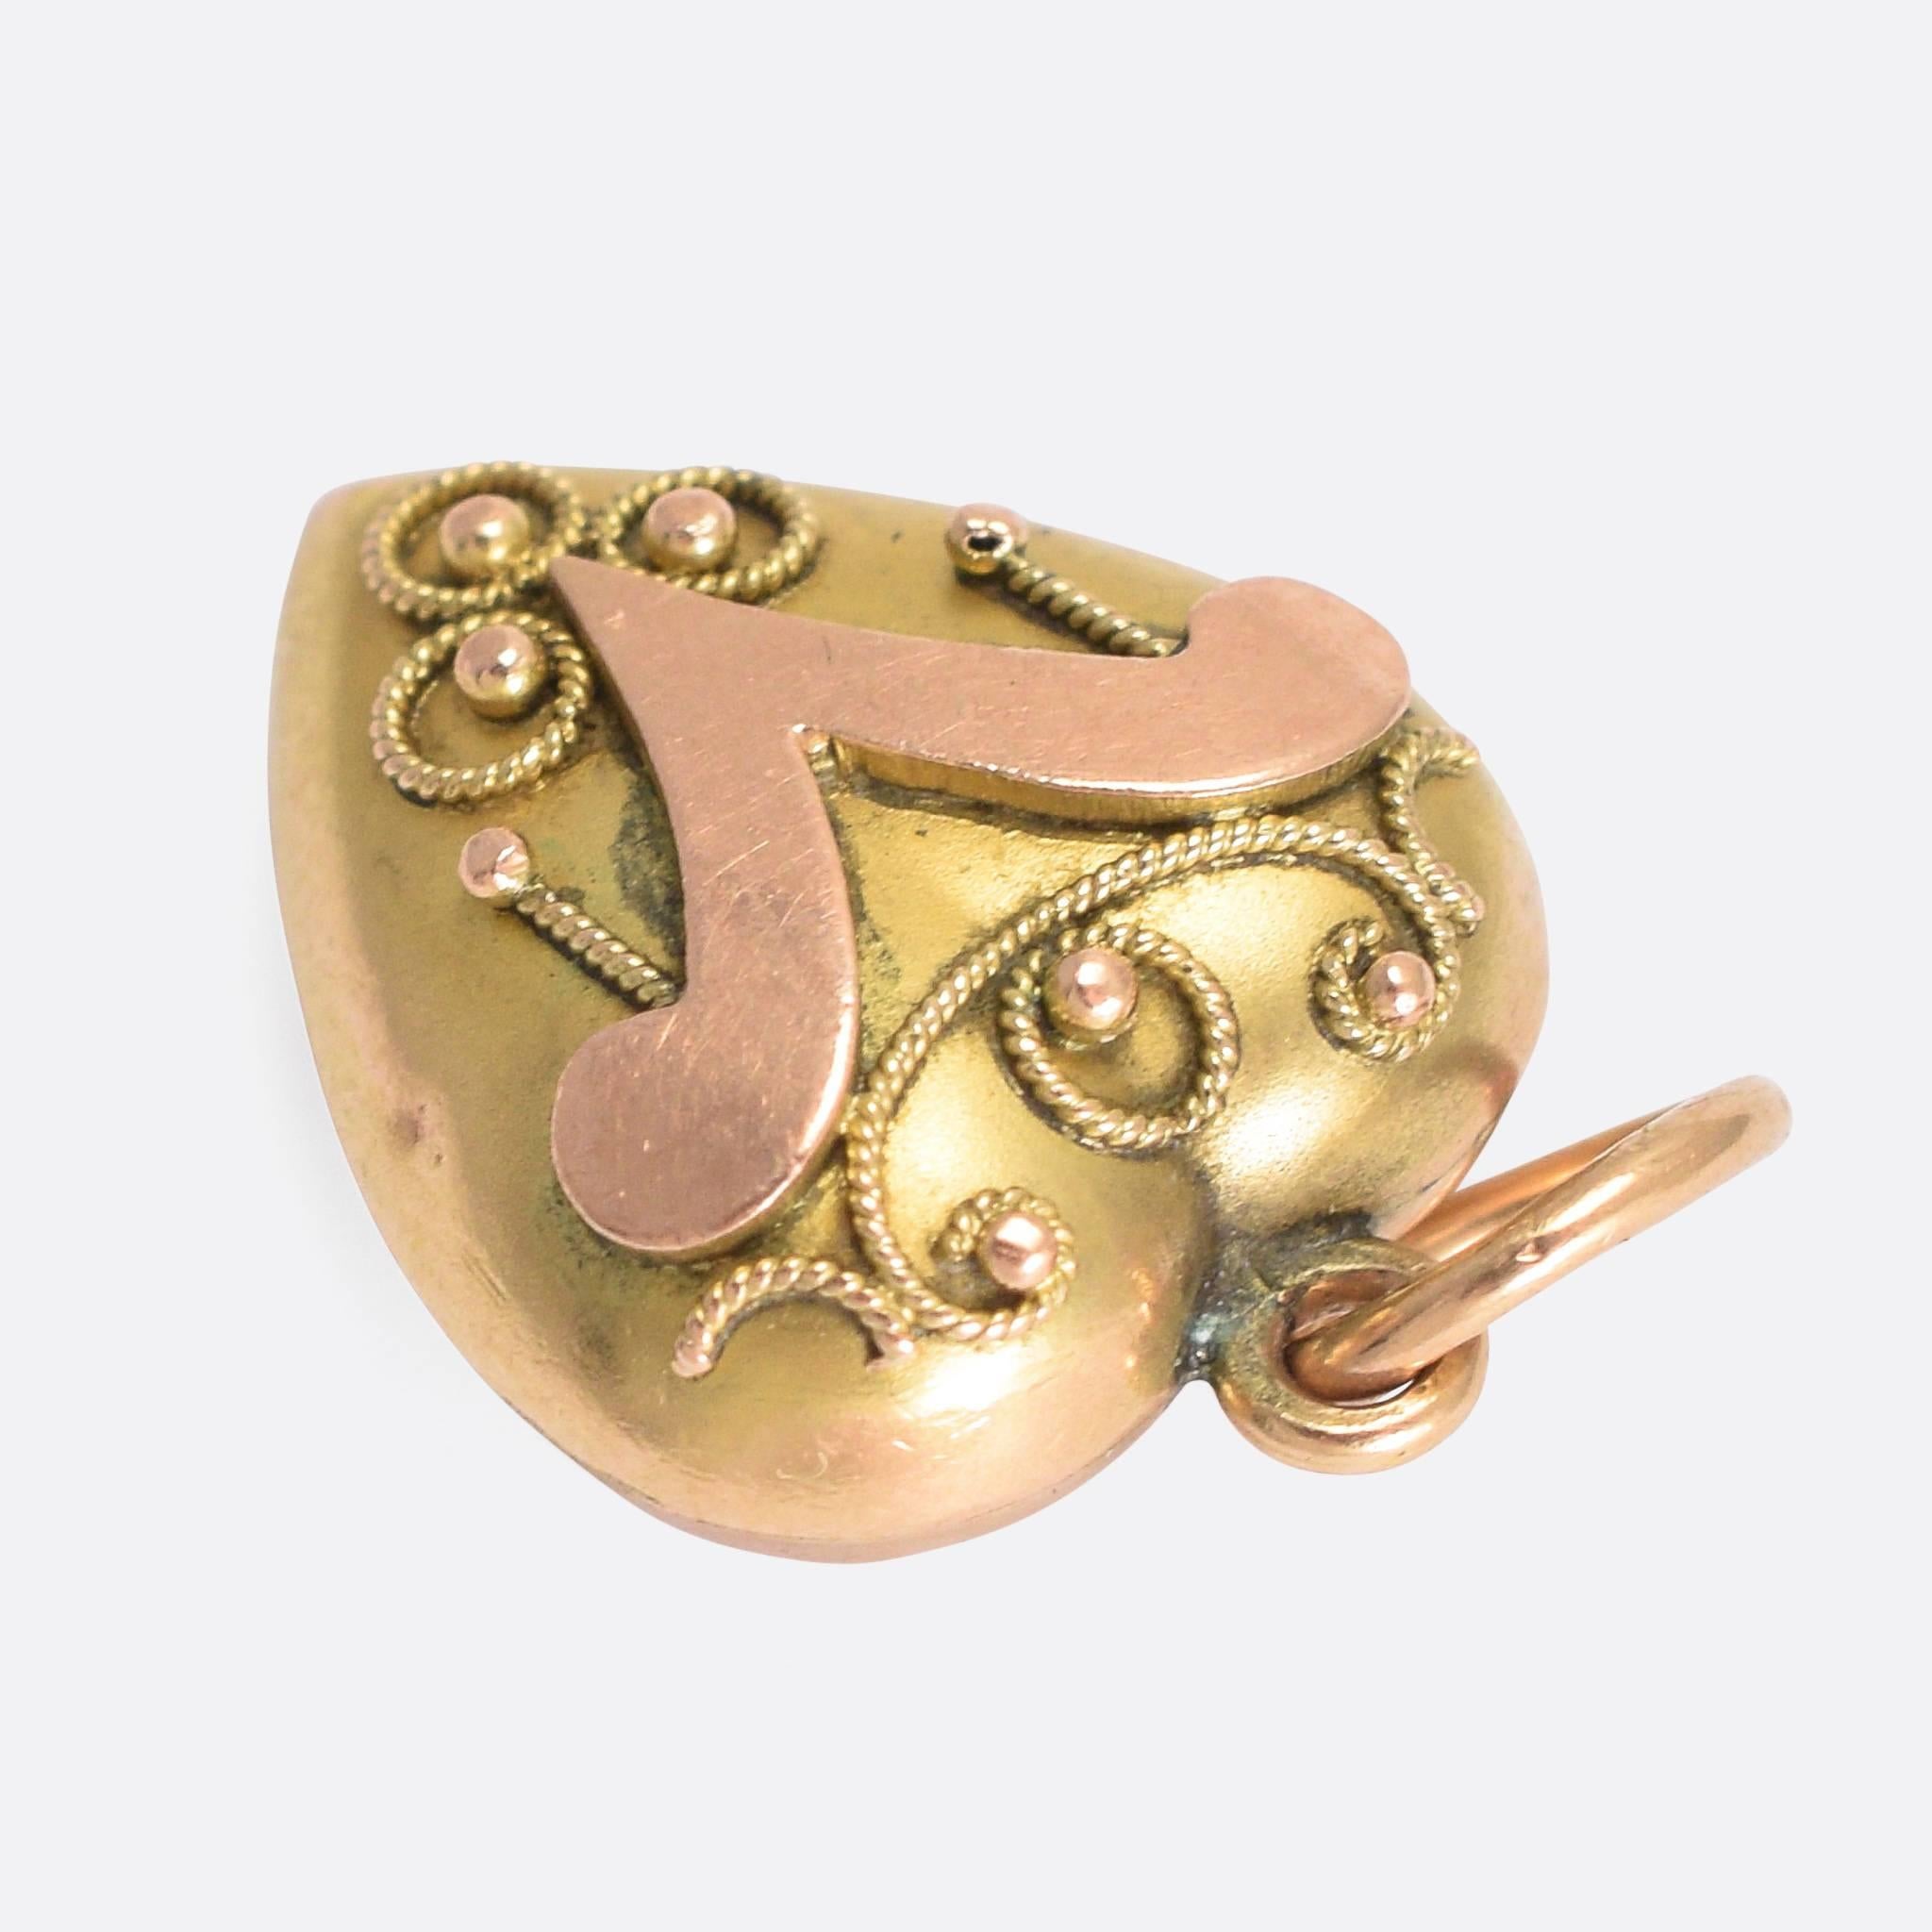 A sweet antique puffed heart charm, modelled in two-tone 9 karat gold. The body of the heart is yellow gold, with an applied rose gold V and Etruscan-style ropework detailing. A cute piece, more in the Victorian style than Edwardian, but it just